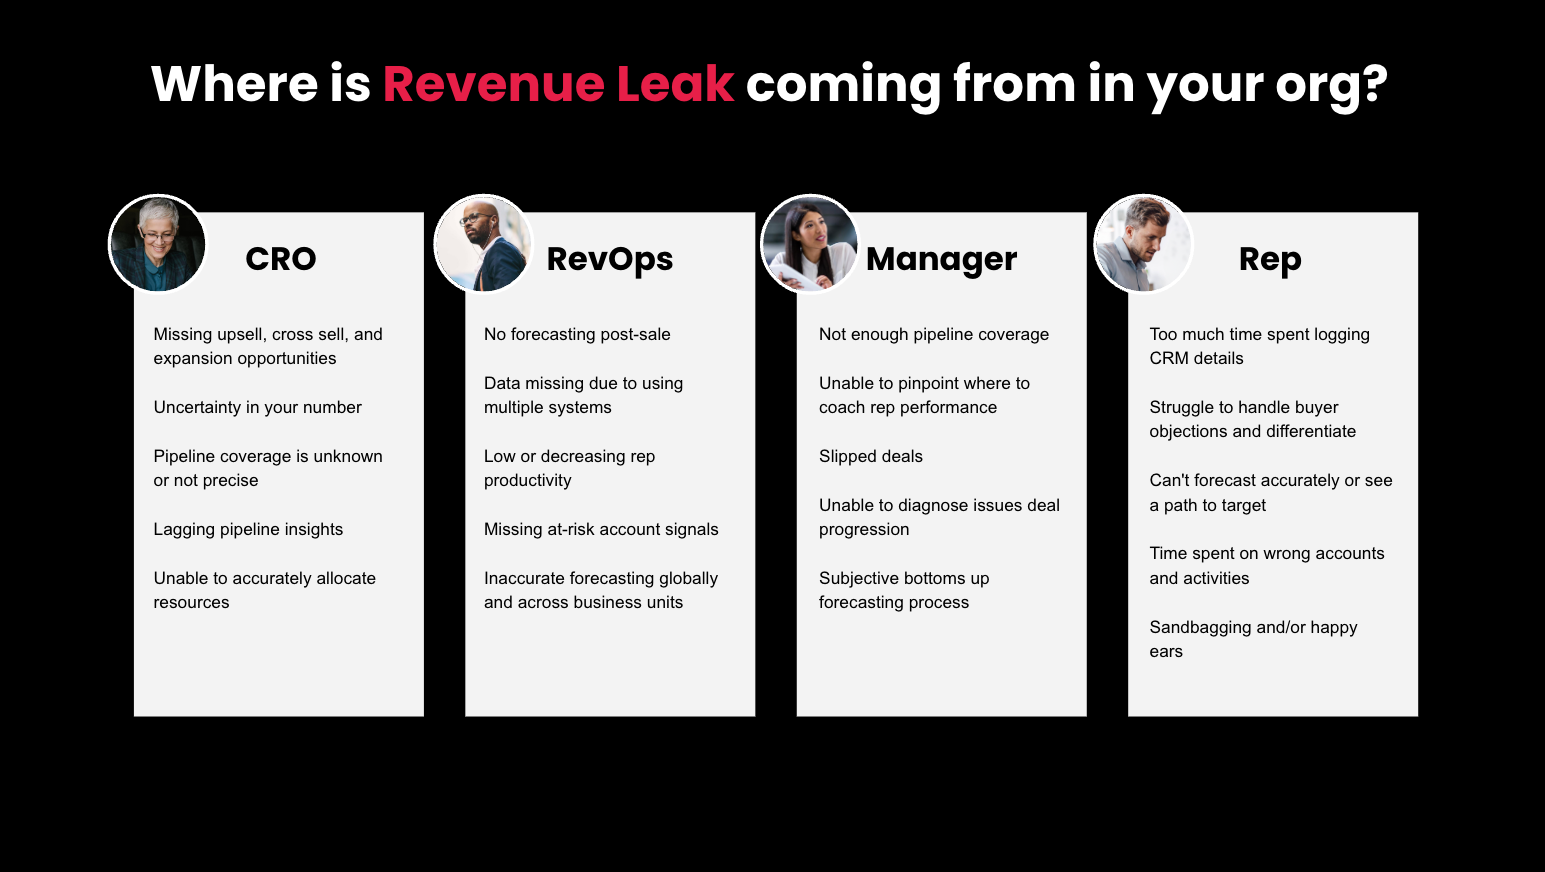 Where is Revenue Leak coming from?